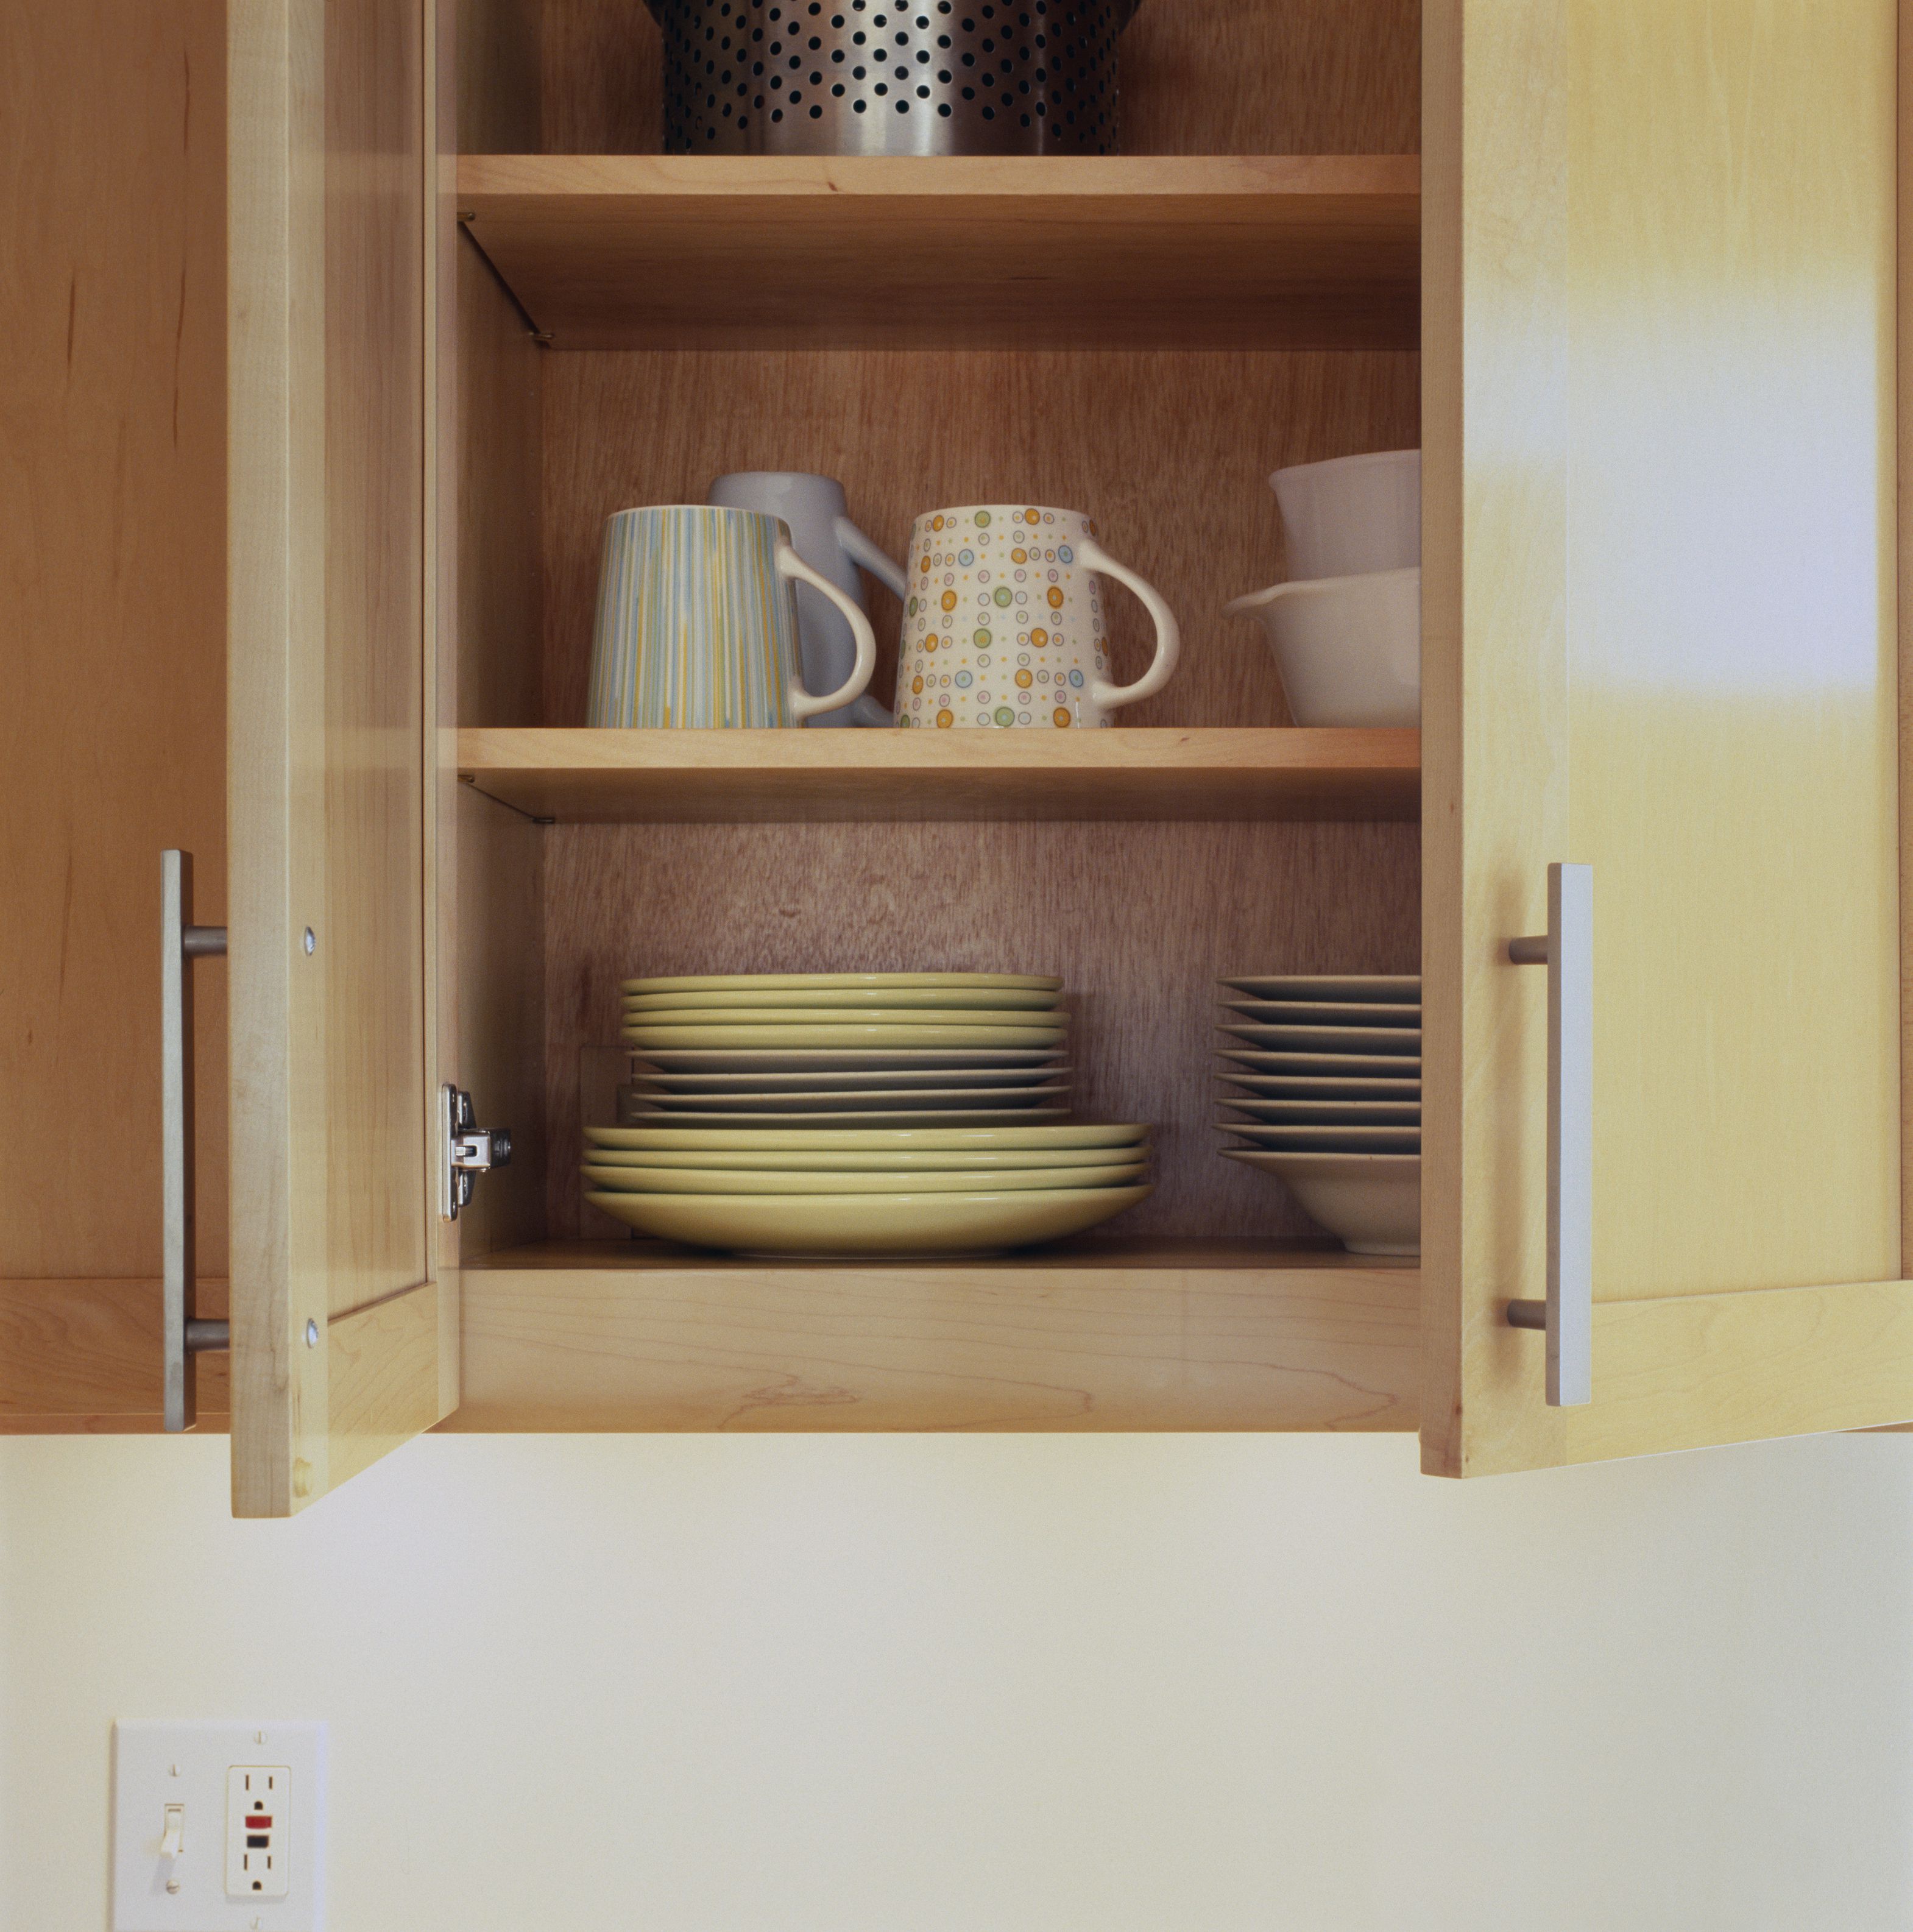 Dishes In Open Kitchen Cabinet Close Up 200364123 001 57e9ea285f9b586c353a0570 